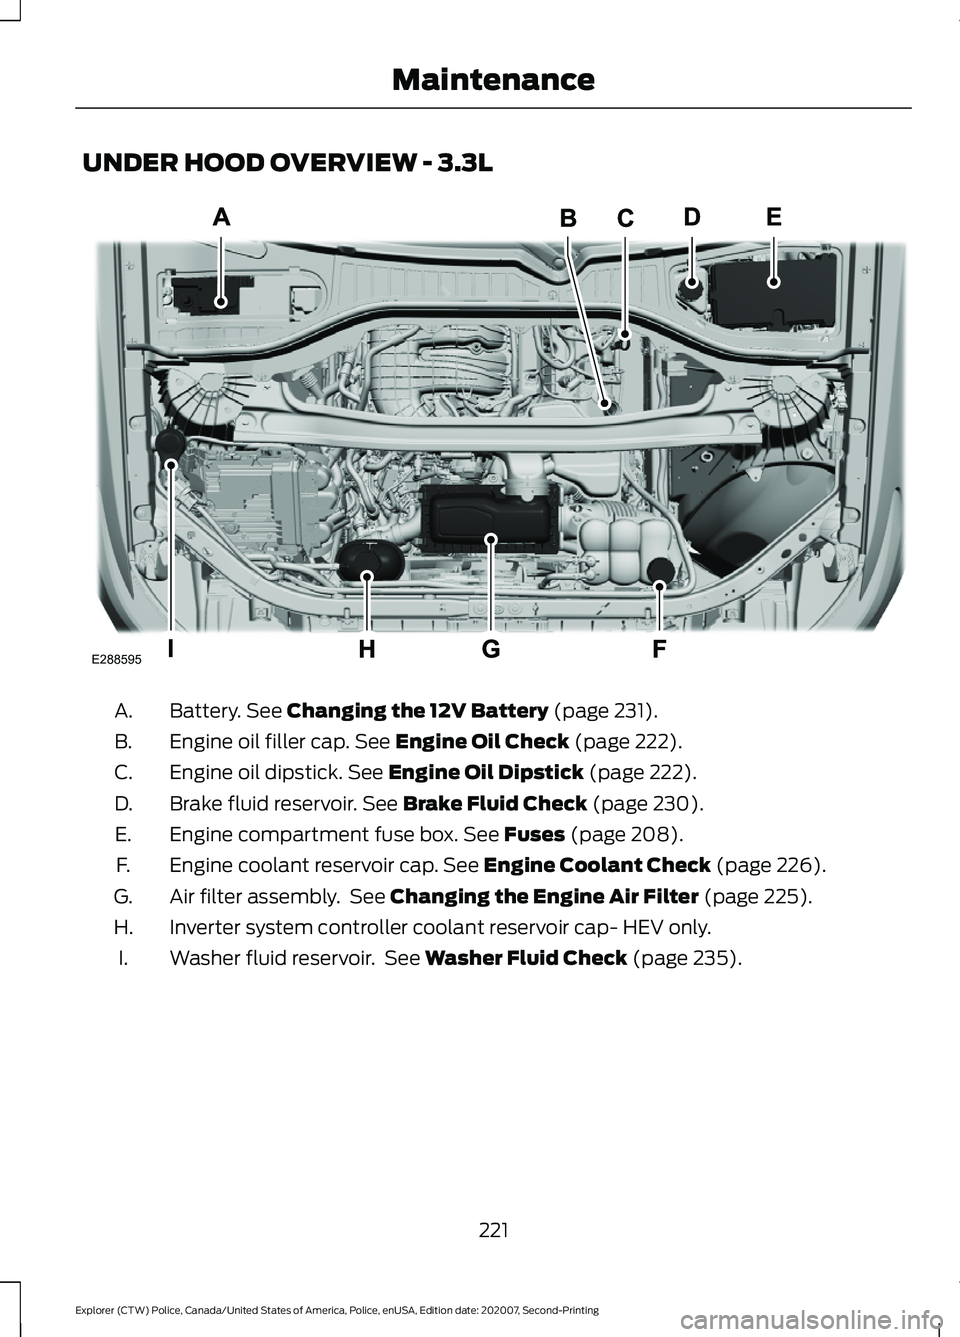 FORD POLICE INTERCEPTOR 2021  Owners Manual UNDER HOOD OVERVIEW - 3.3L
Battery. See Changing the 12V Battery (page 231).
A.
Engine oil filler cap.
 See Engine Oil Check (page 222).
B.
Engine oil dipstick.
 See Engine Oil Dipstick (page 222).
C.